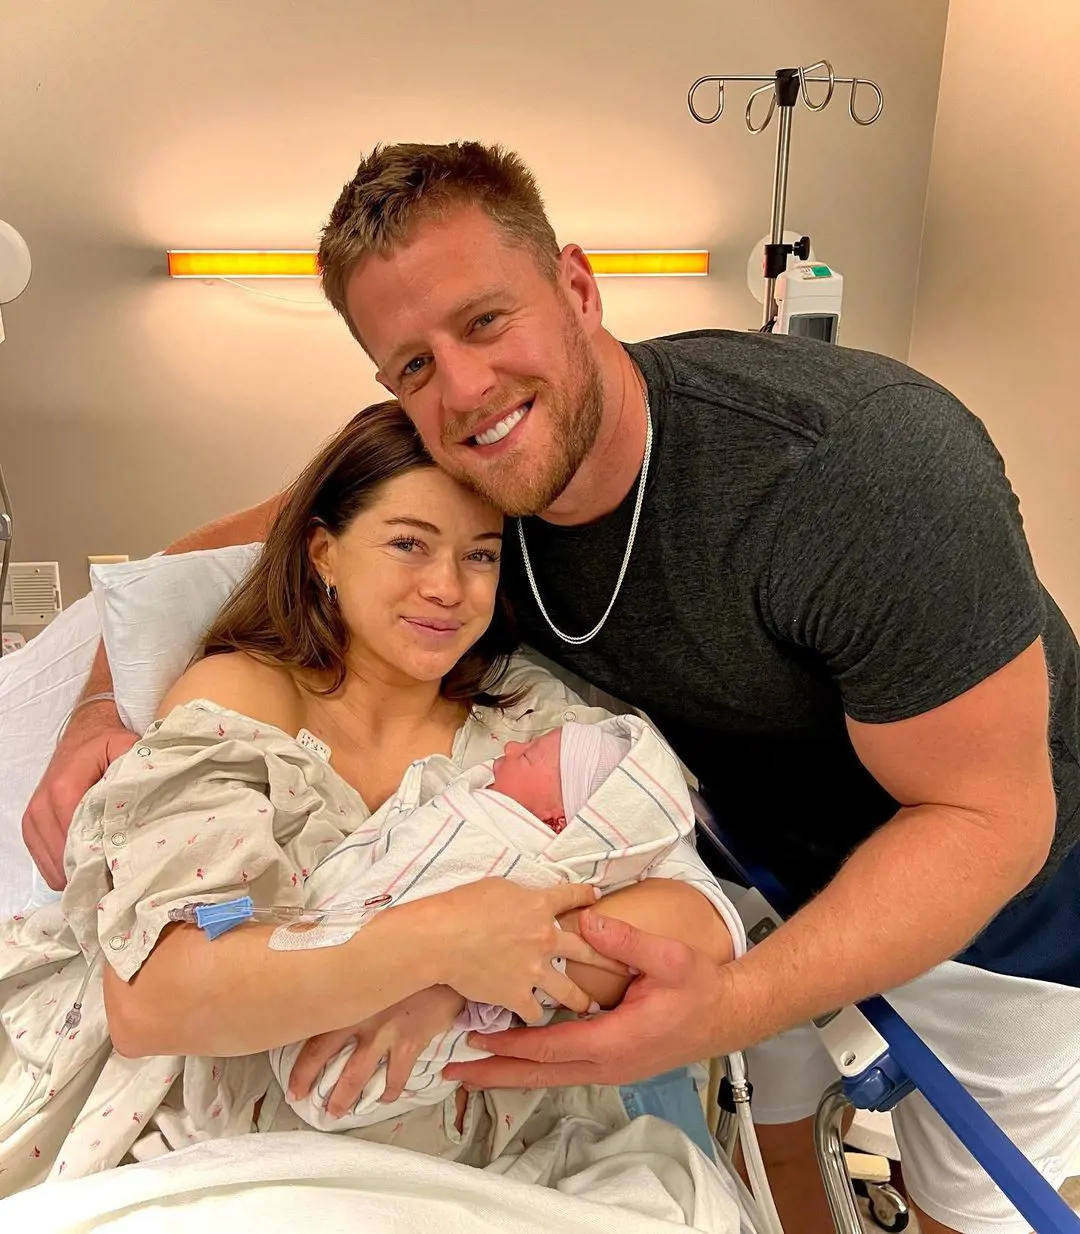 JJ and Ohai announced the birth of their firstborn on Instagram.